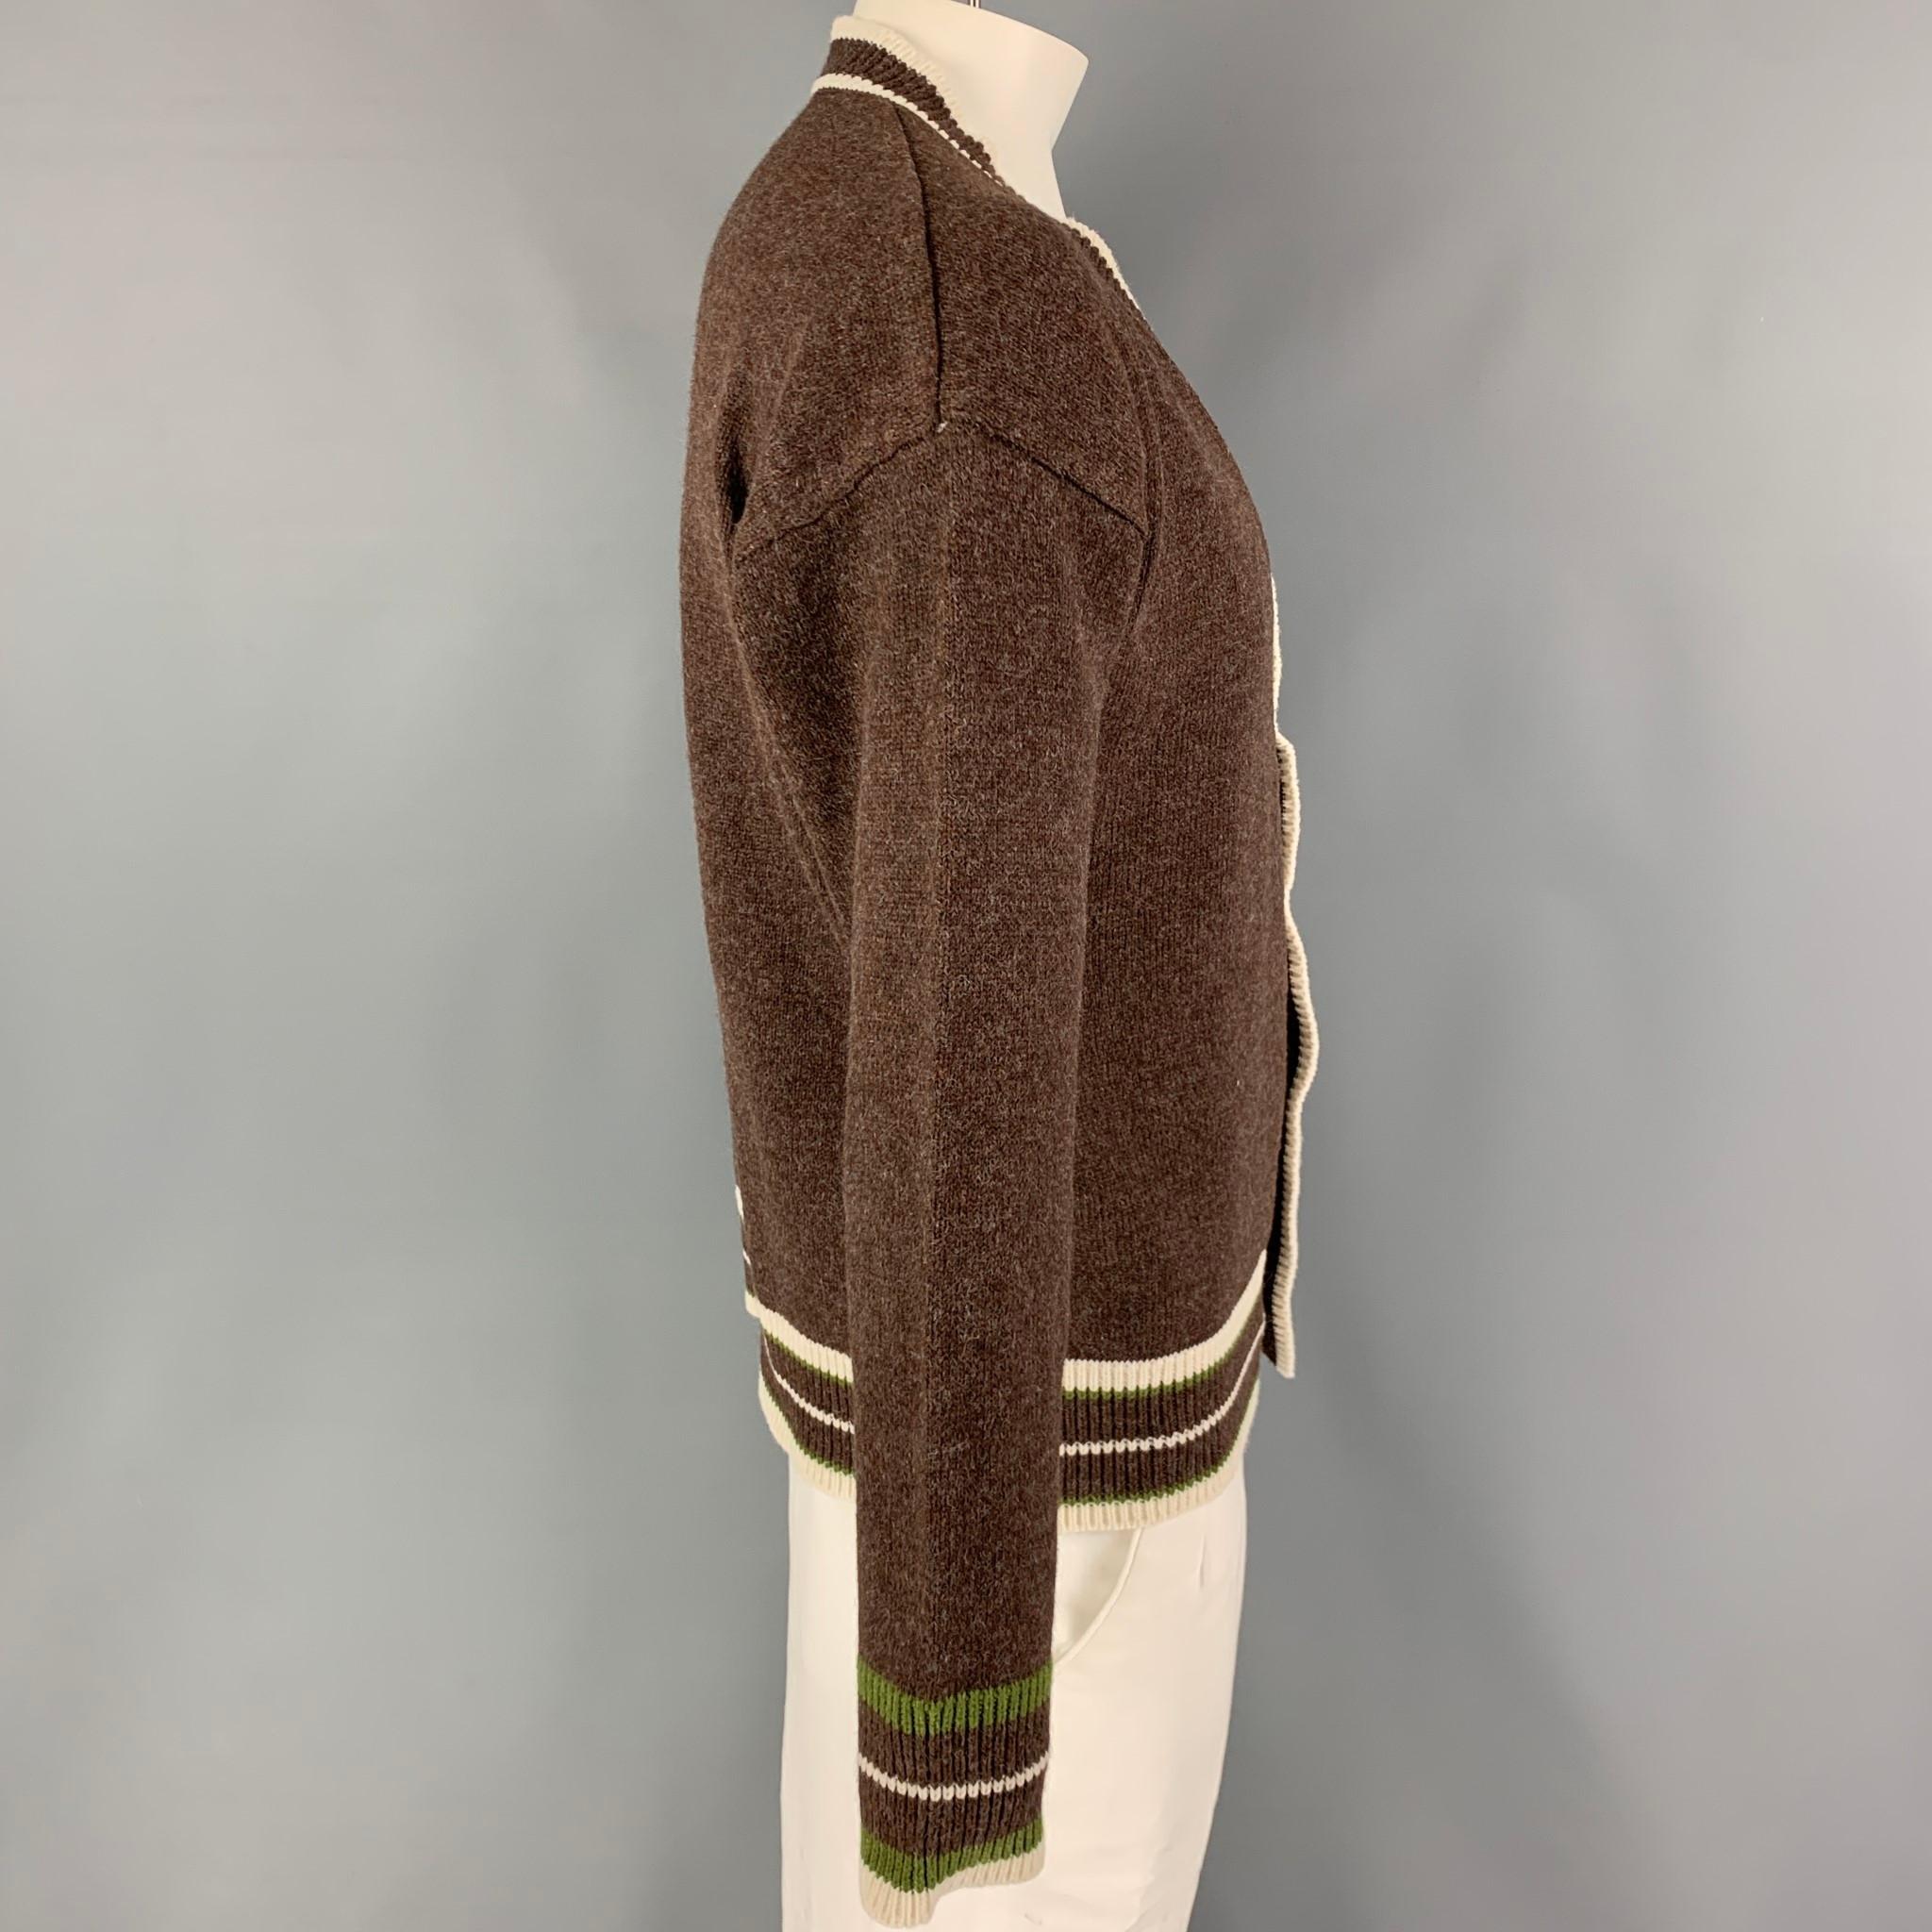 KITON cardigan comes in a brown knitted cotton featuring a cream contrast trim and a buttoned closure. Made in Italy. 

New with tags. 
Marked: M/50

Measurements:

Shoulder: 24 in.
Chest: 46 in.
Sleeve: 23 in.
Length: 27 in.